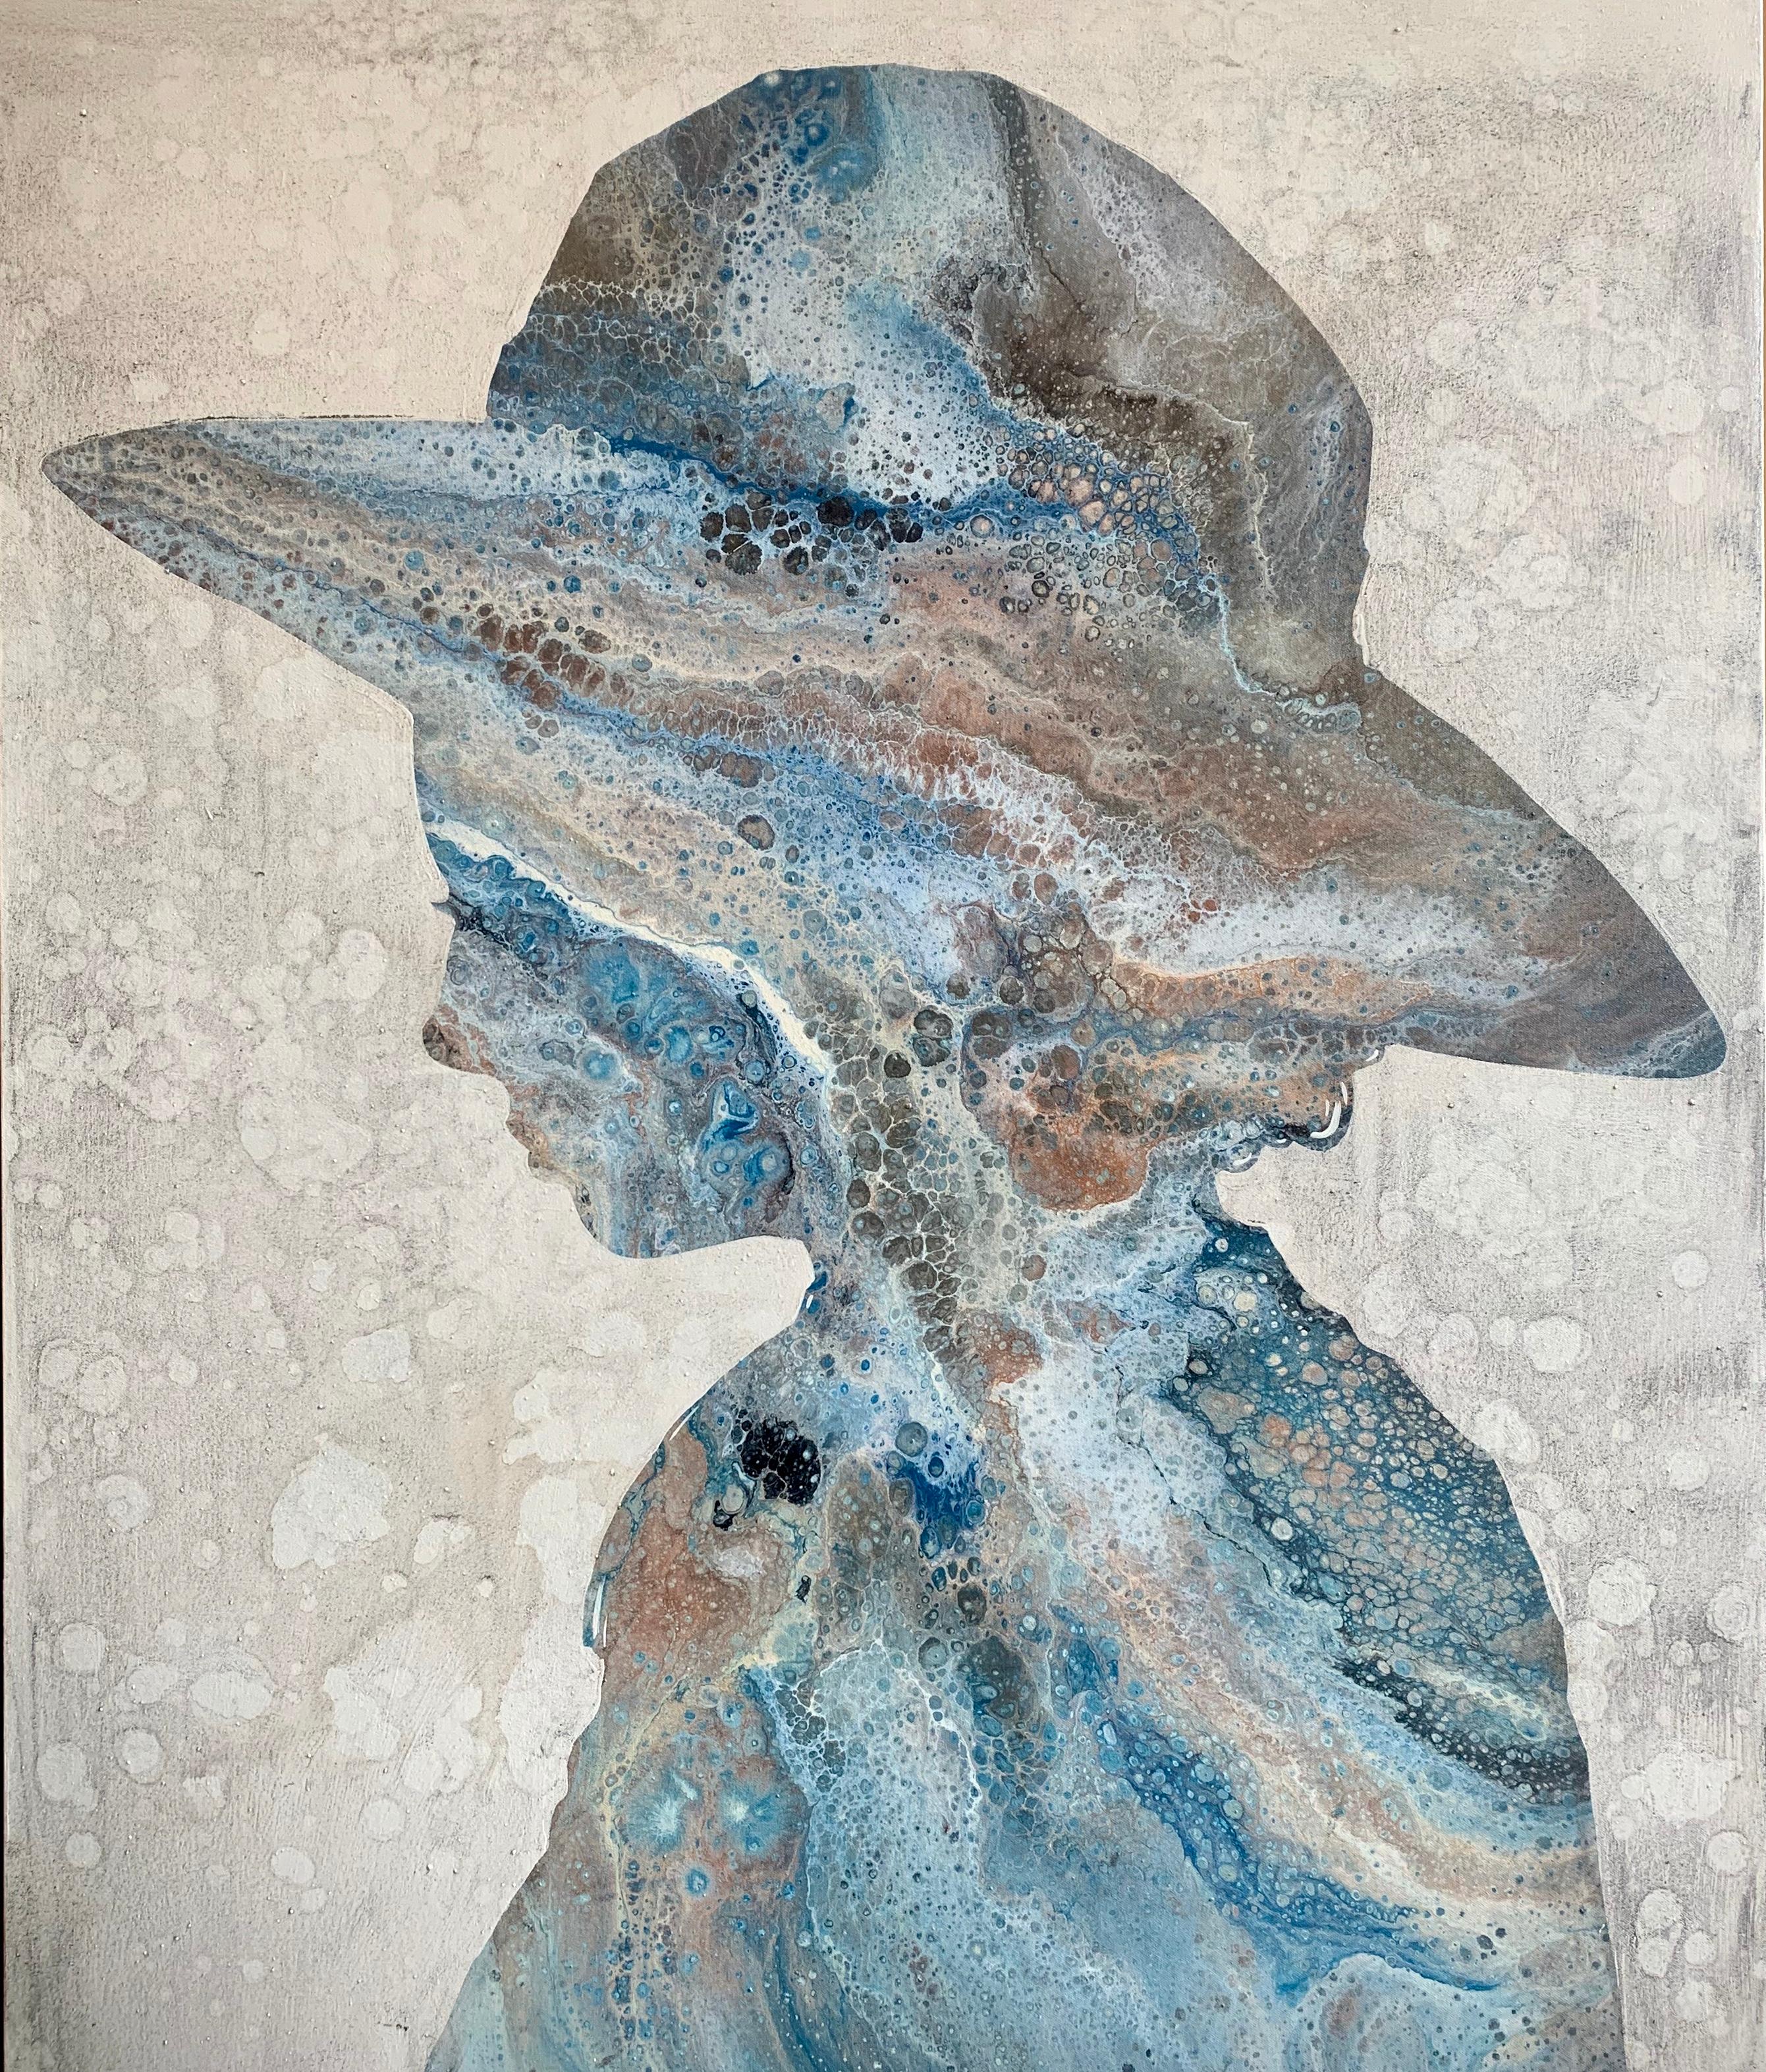 Christopher Peter Figurative Painting - "Splash Silhouette" female silhouette wearing sun hat with blue and brown marble